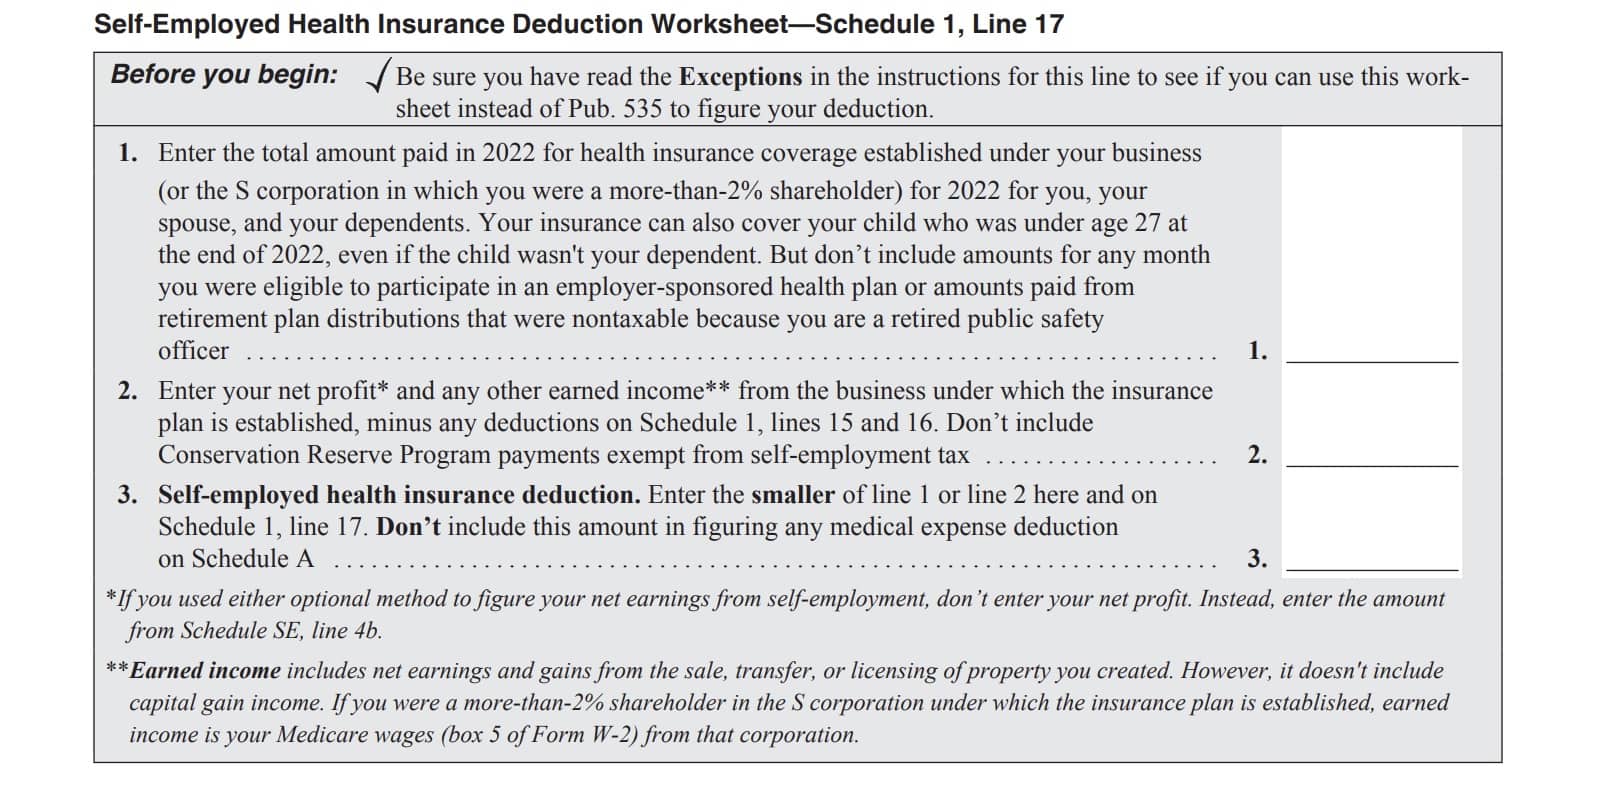 IRS Schedule 1, line 17, self-employed health insurance deduction worksheet